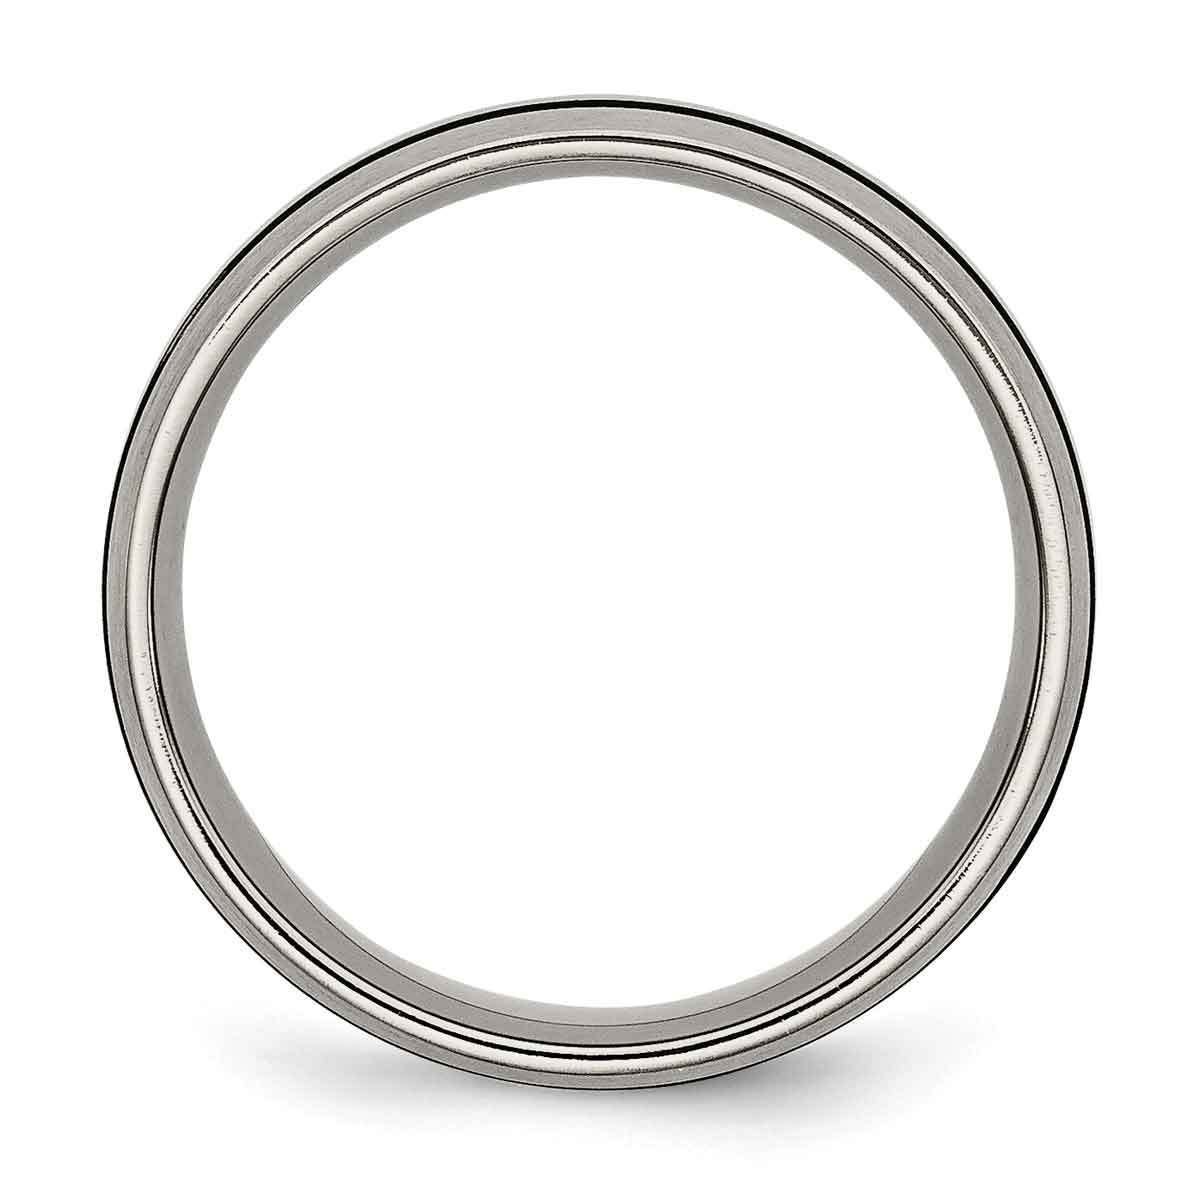 Titanium Enameled Grooved 8mm Satin Band Best Quality Free Gift Box Satisfaction Guaranteed 